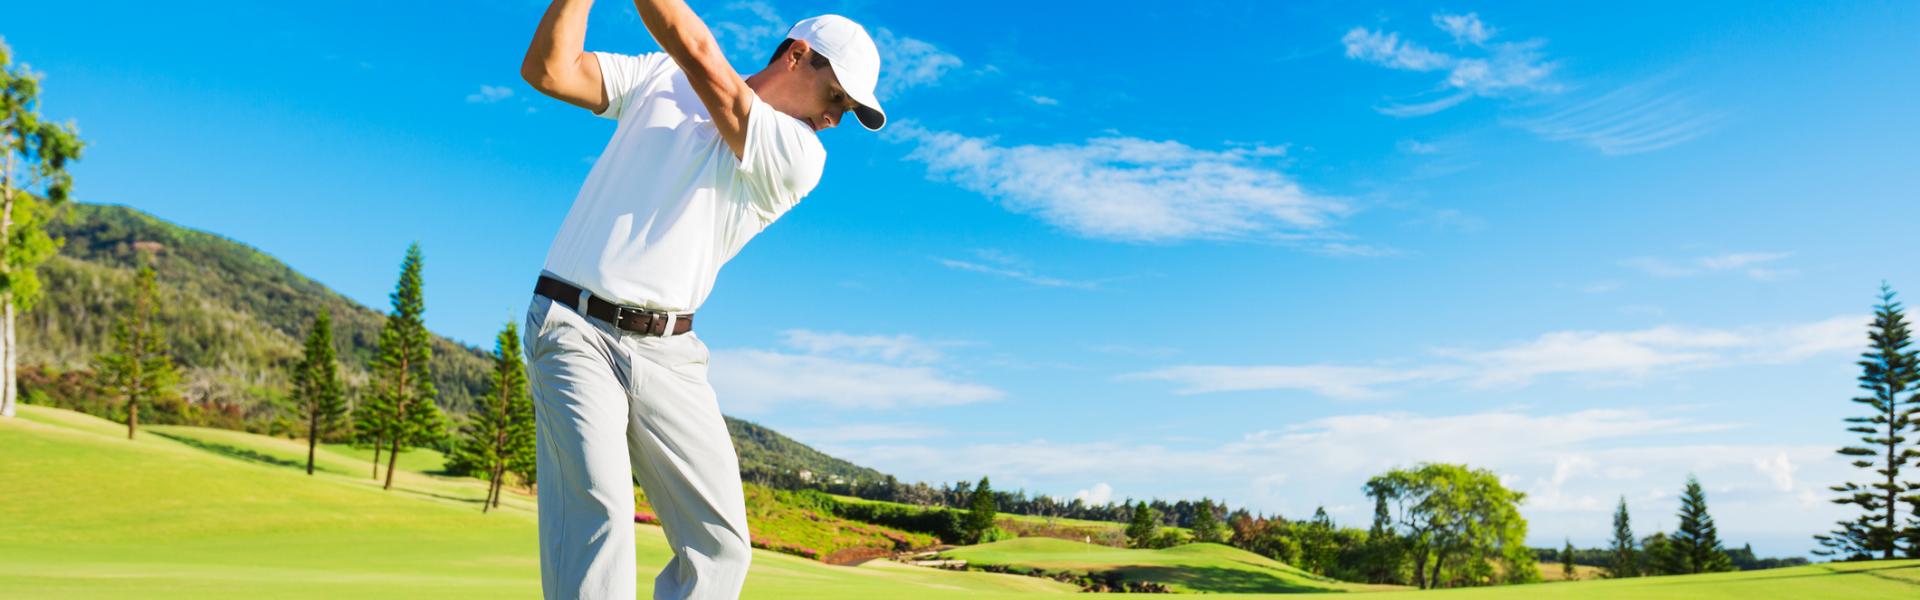 Golf Holidays in South Africa - HomeToGo